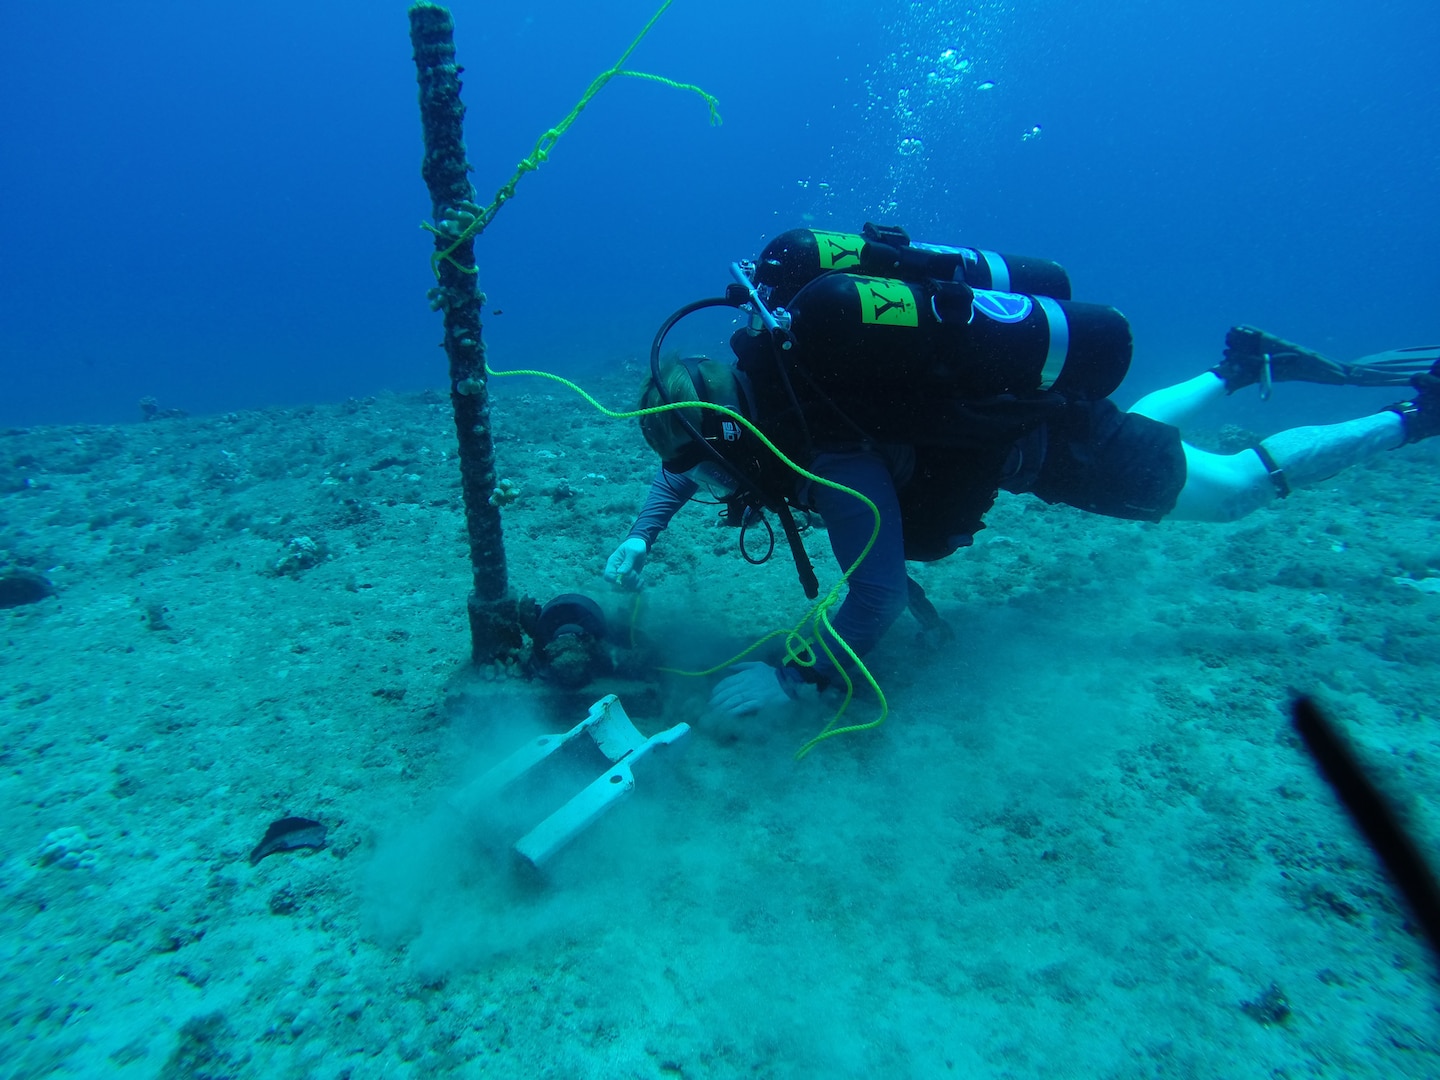 150820-N-ZZ999-001 BARKING SANDS, Hawaii (Aug. 20, 2015) Builder 2nd Class Joseph Hophan, assigned to Underwater Construction Team (UCT) 2, verifies an anchor point in 110 feet of seawater that will be used during cable splicing operations to allow a cable ship to anchor at a specific location. UCT 2's Construction Dive Detachment Charlie (CDDC) is performing subsea cable maintenance at the Pacific Missile Range Facility. CDDC Is on the first stop of their deployment, where they are conducting inspection, maintenance and repair of various underwater and waterfront facilities in support of the Pacific Fleet. (U.S. Navy photo by Builder 2nd Class Dave Madmon/Released)    